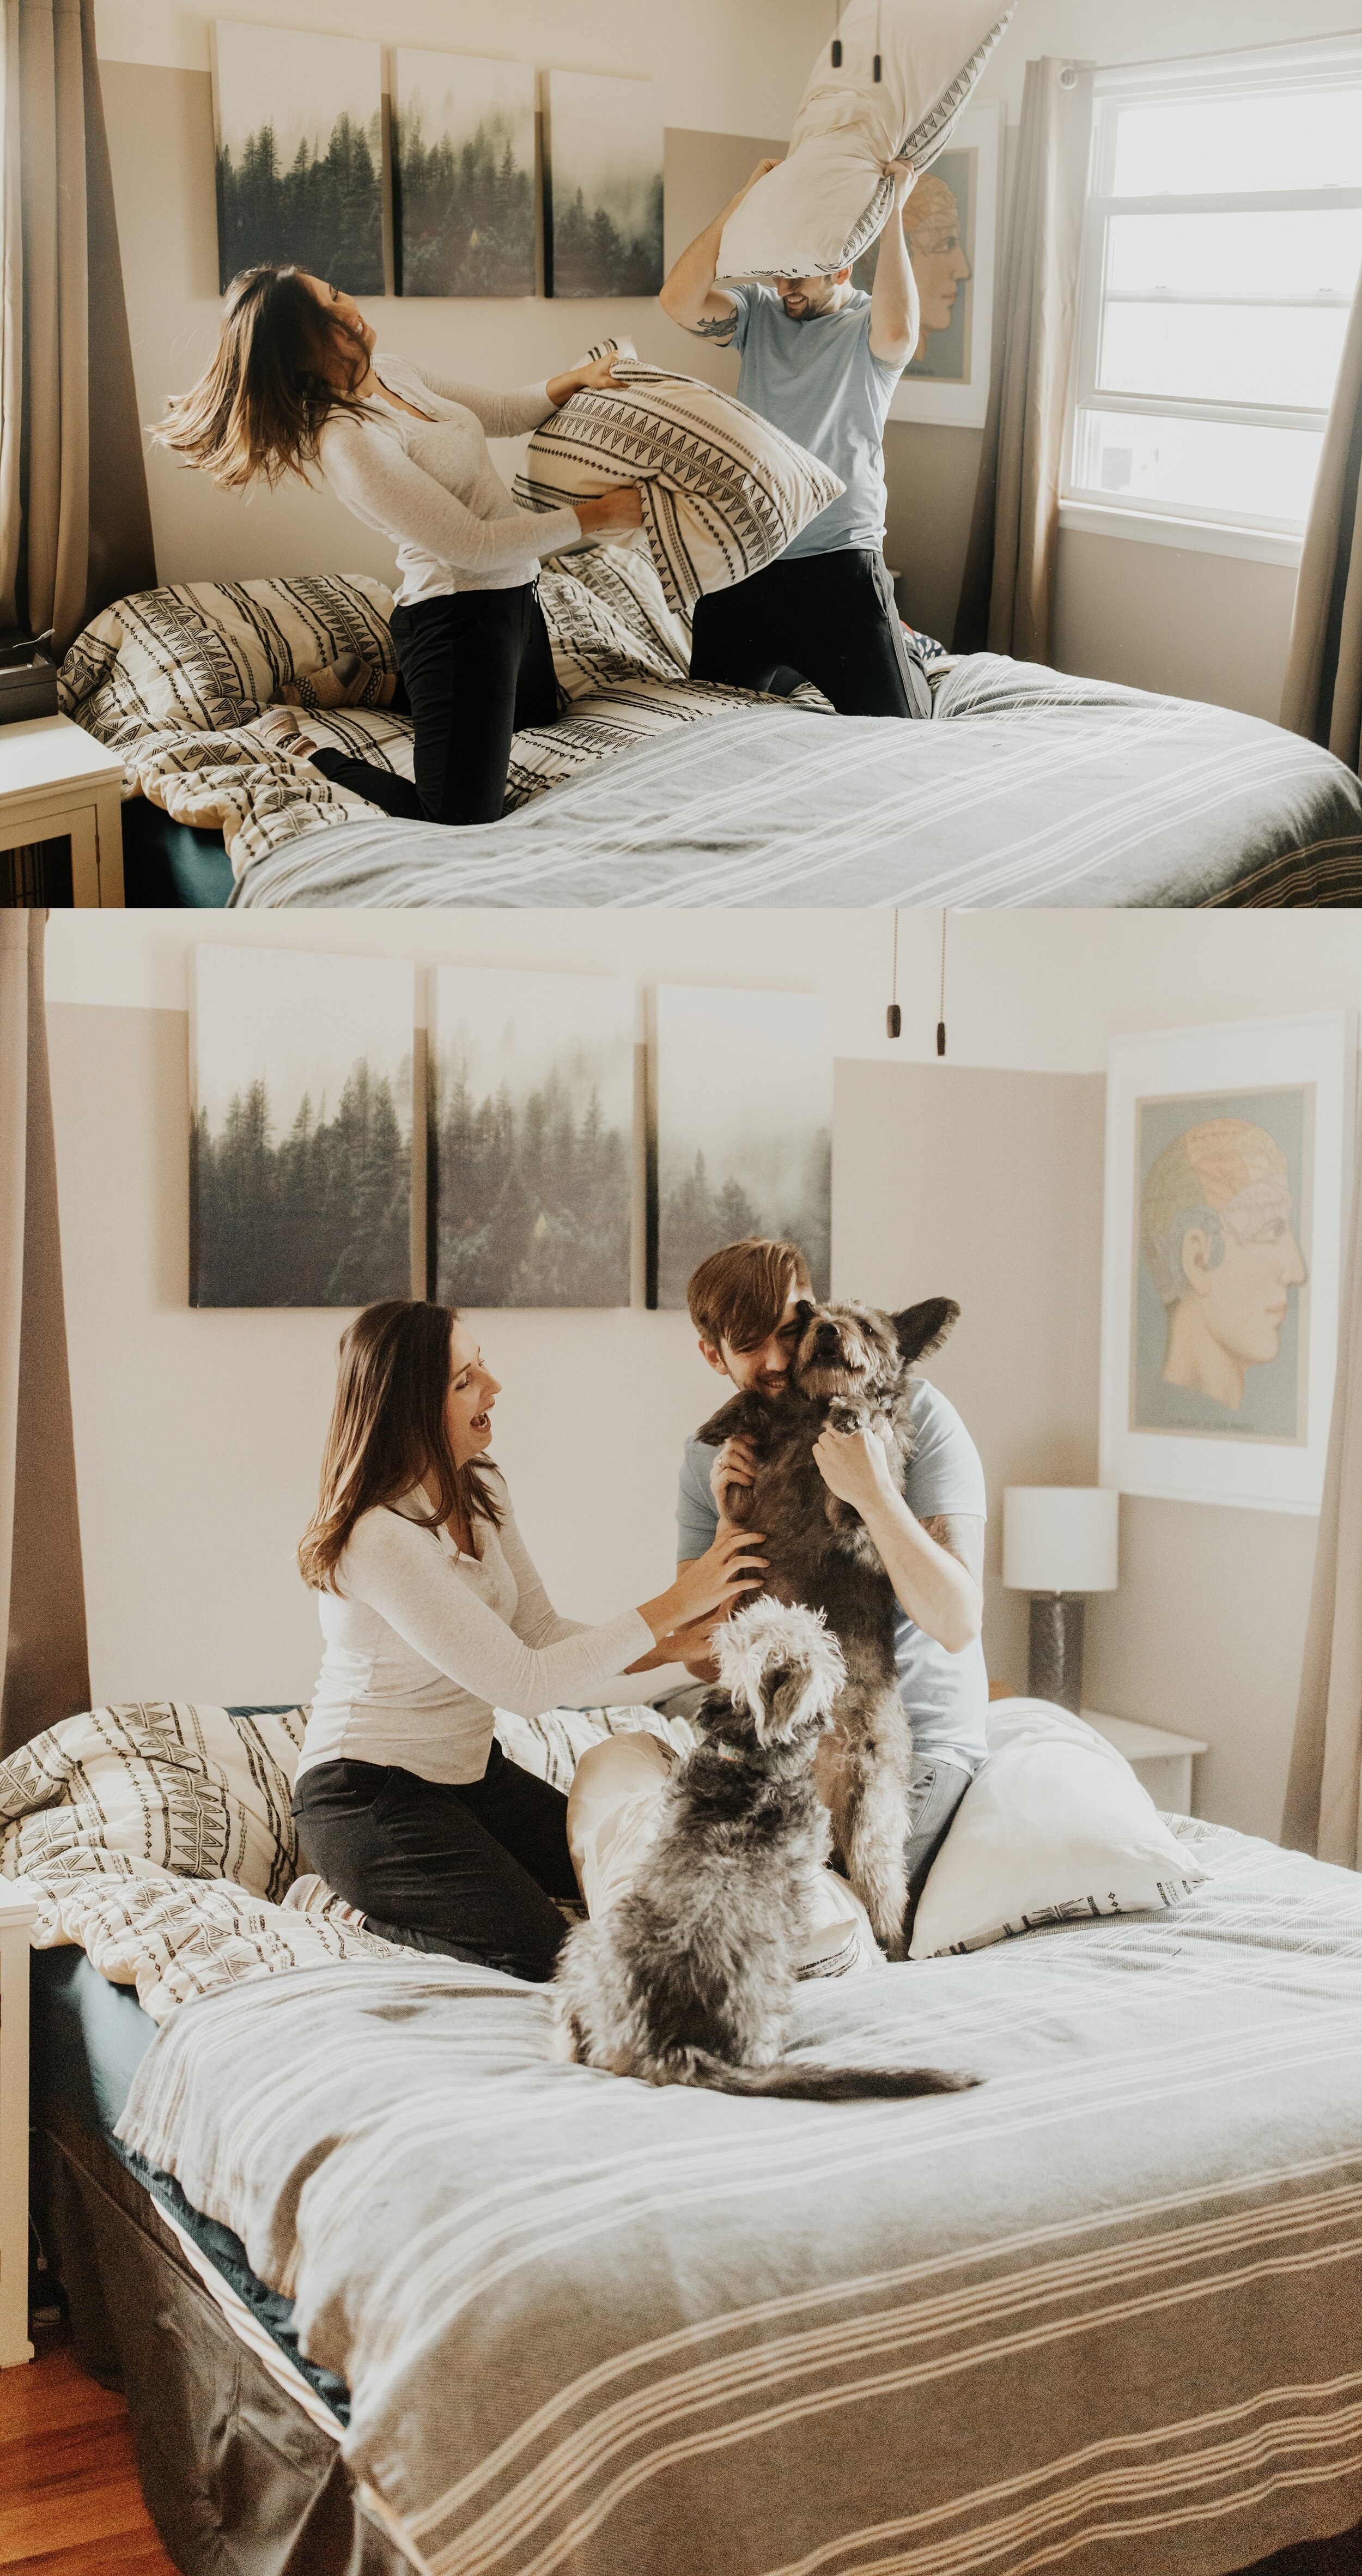 jessika-christine-photography-in+home-engagement-couples-cozy-adventurous-session (25).jpg